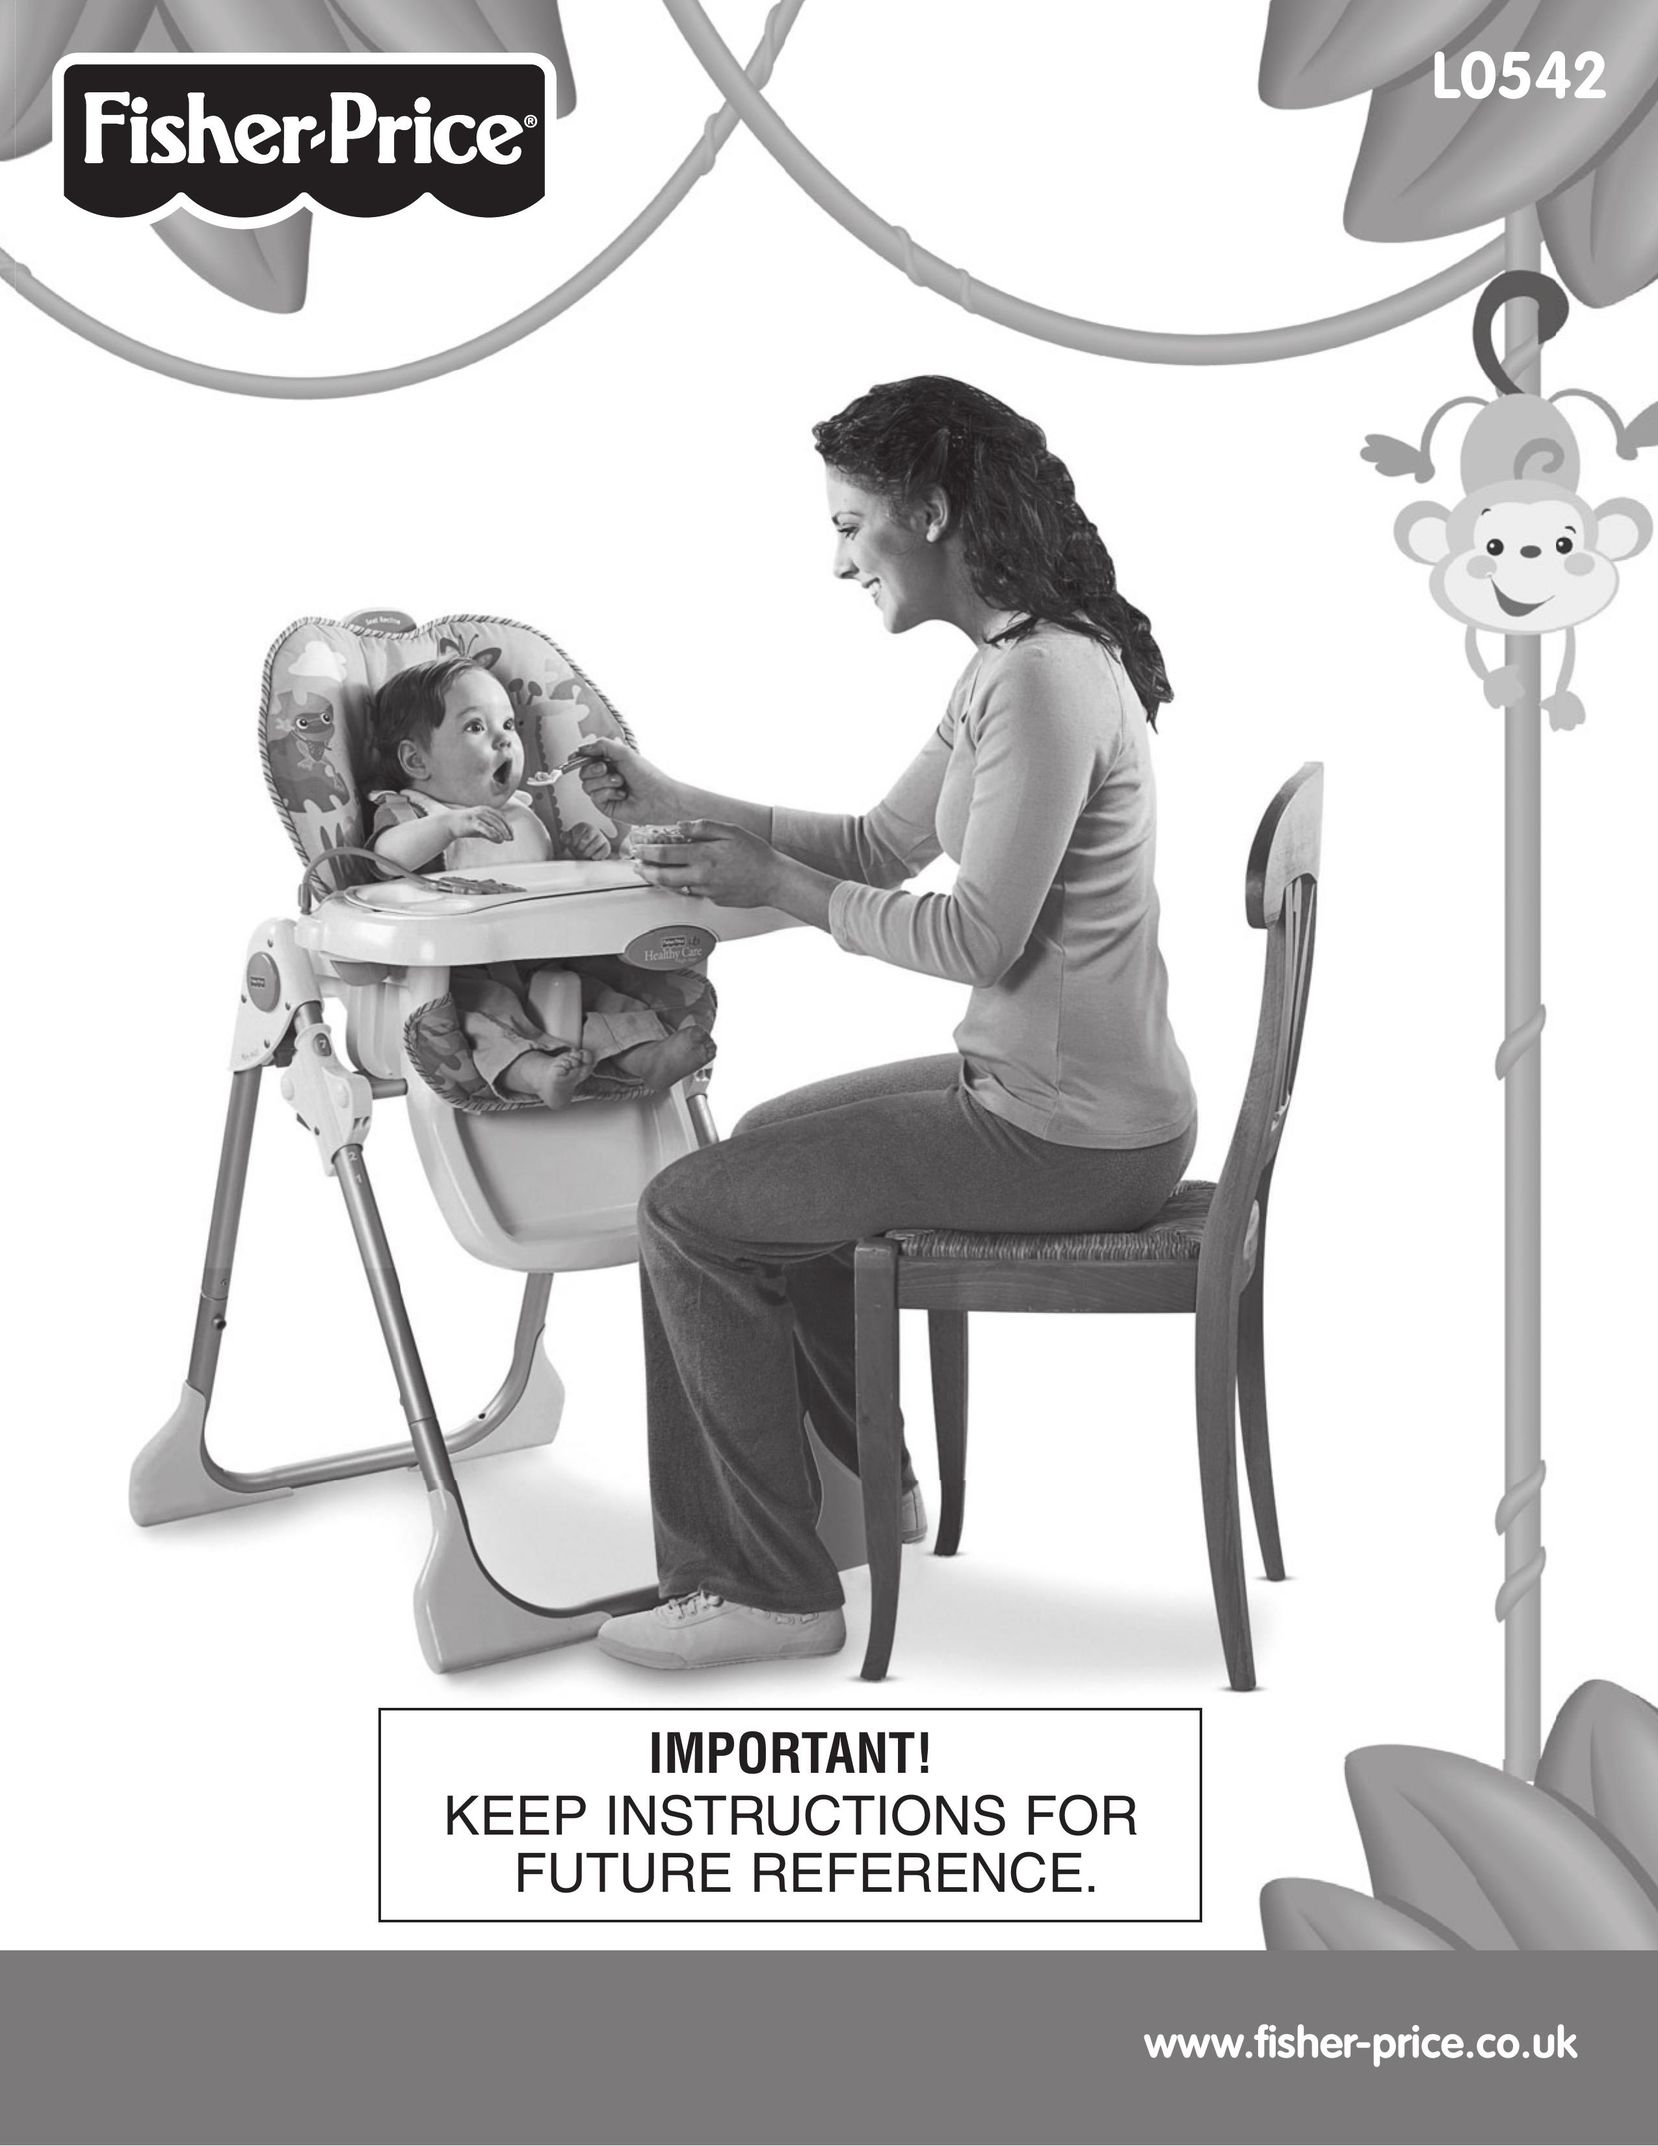 Fisher-Price L0542 High Chair User Manual